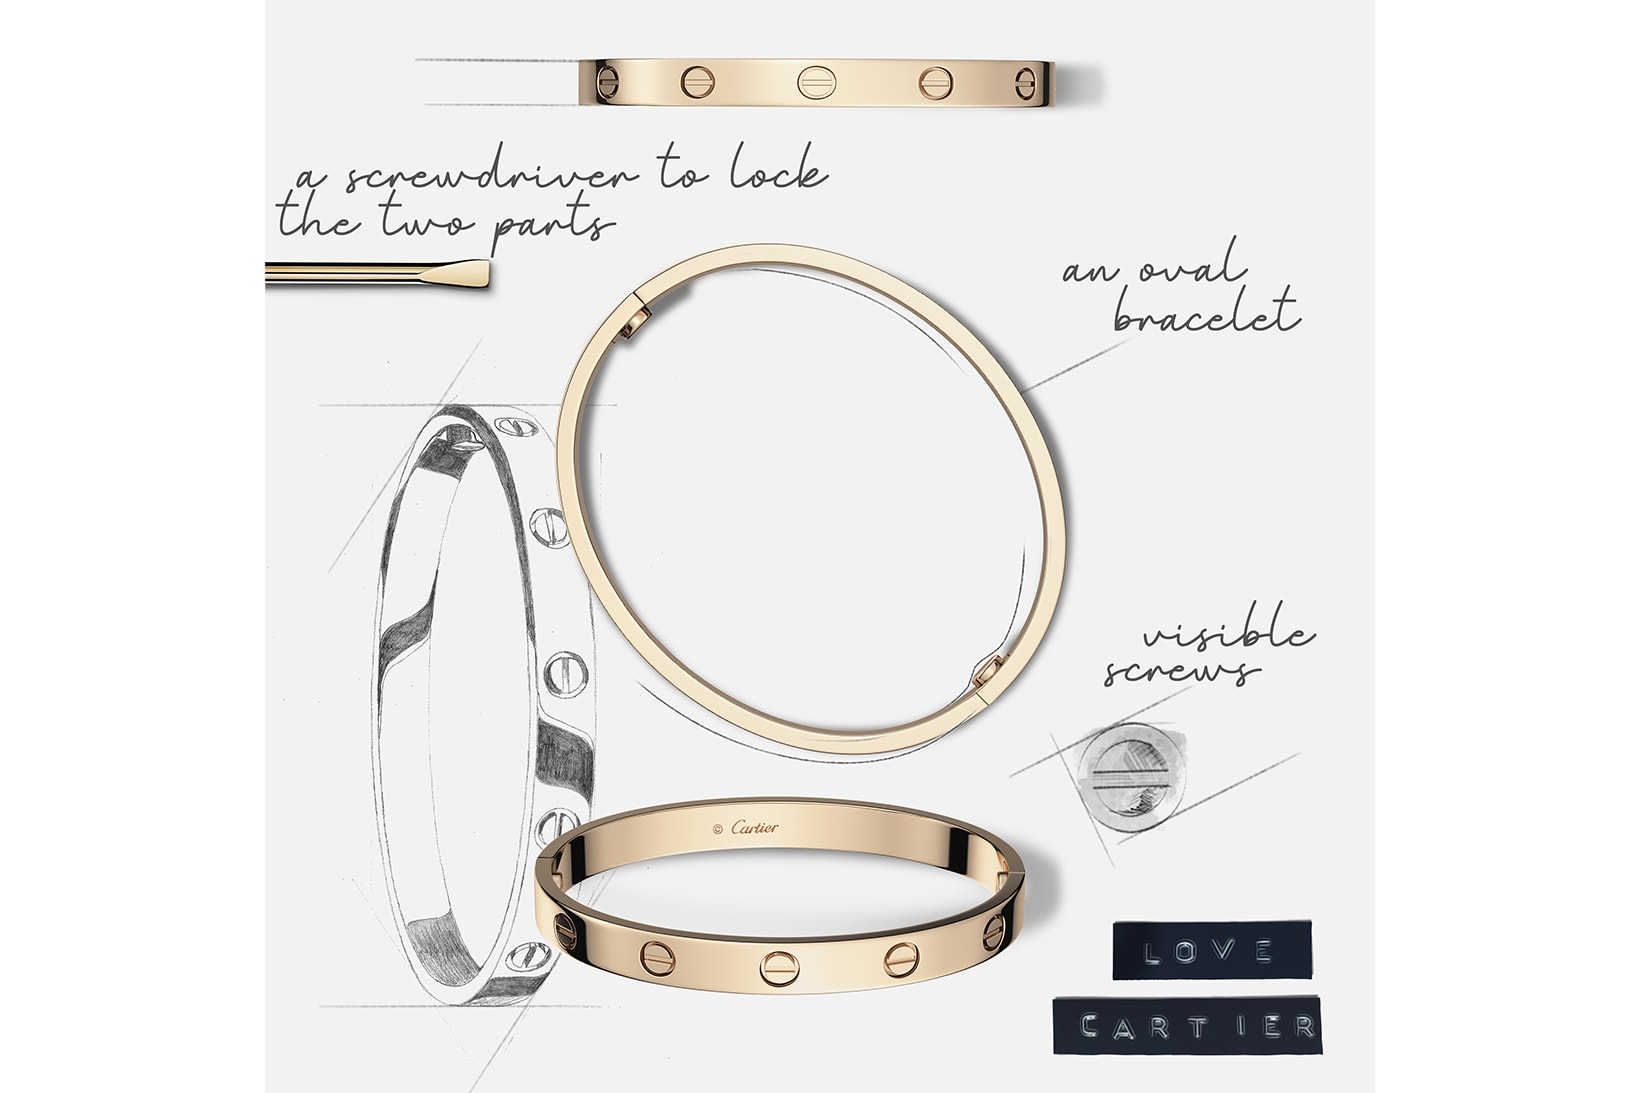 cartier love bracelet the culture of design campaign jewelry details rose gold silver